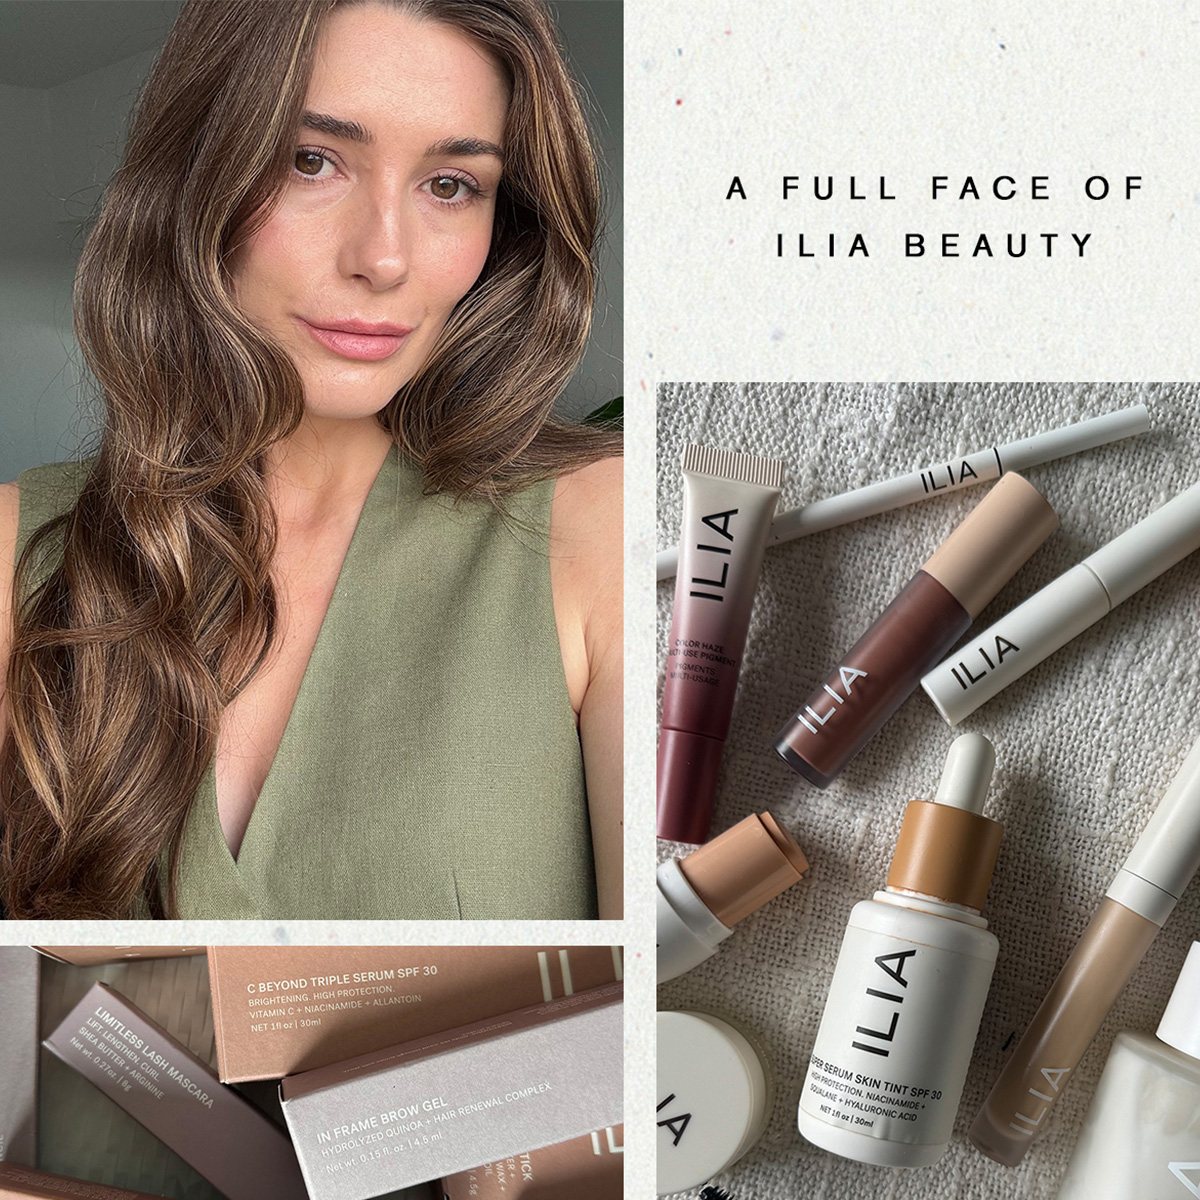 I Just Tried a Full Face of Ilia Beauty—These Are the Products I'd Actually Buy Again